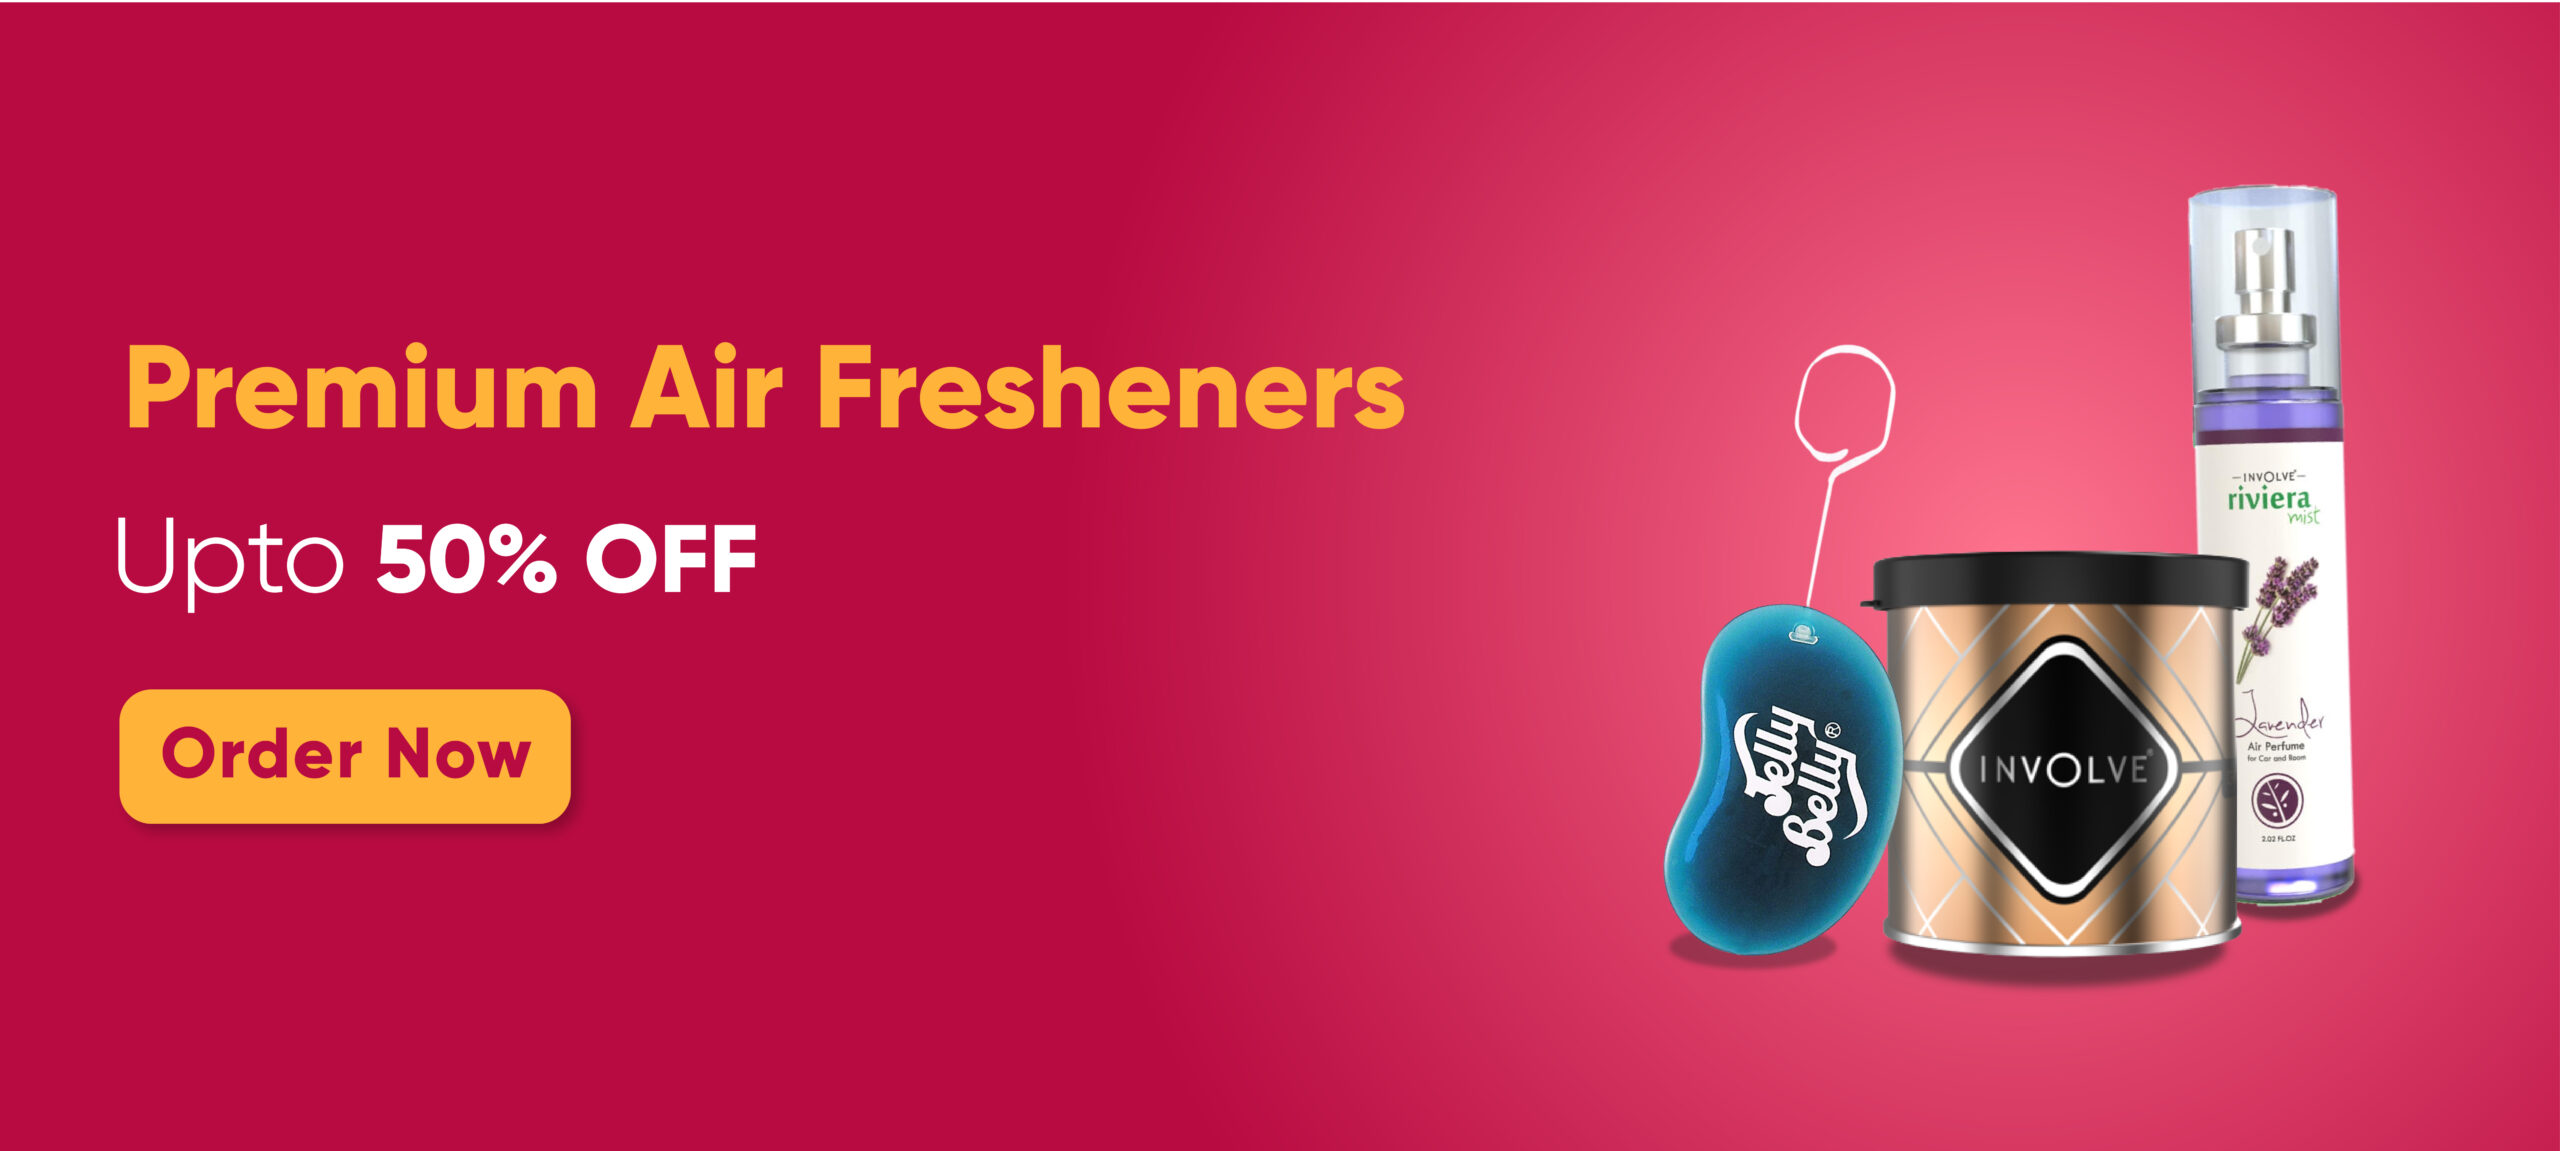 Air fresheners Mobile banner